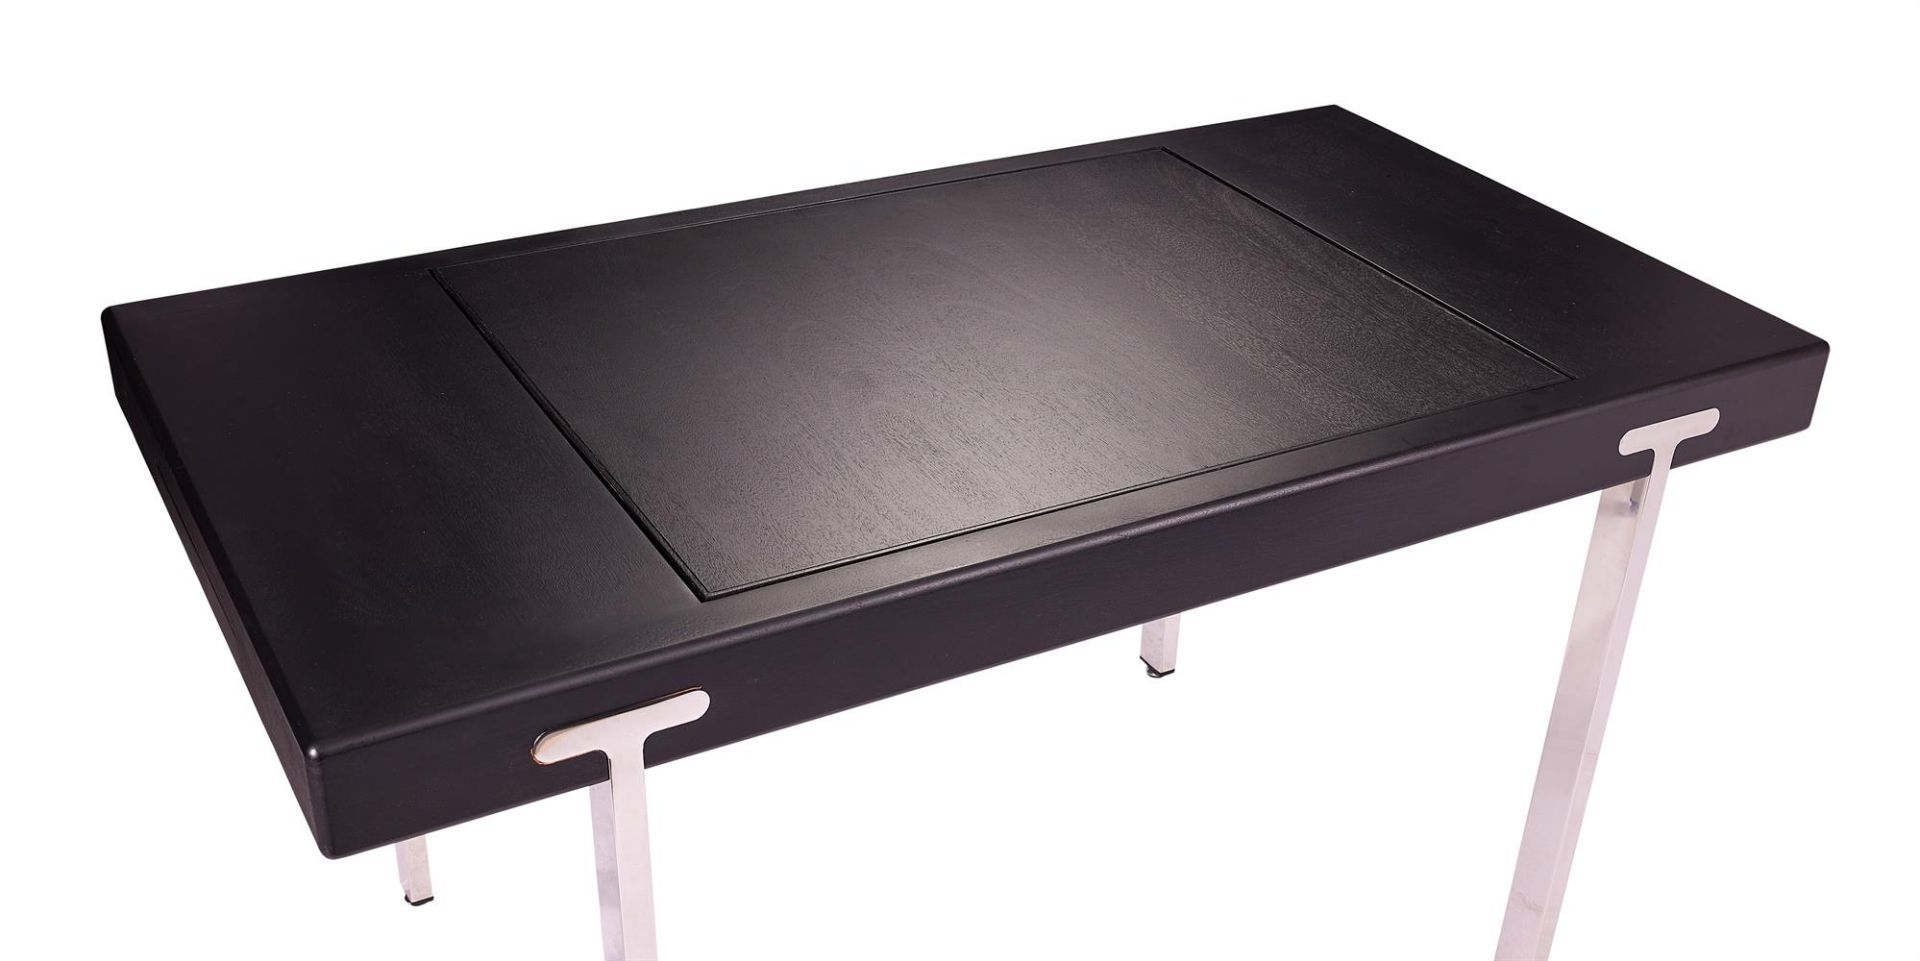 AN EBONISED AND POLISHED NICKEL REVERSABLE TOP BACKGAMMON TABLE, BY KEN BOLAN - Image 3 of 3